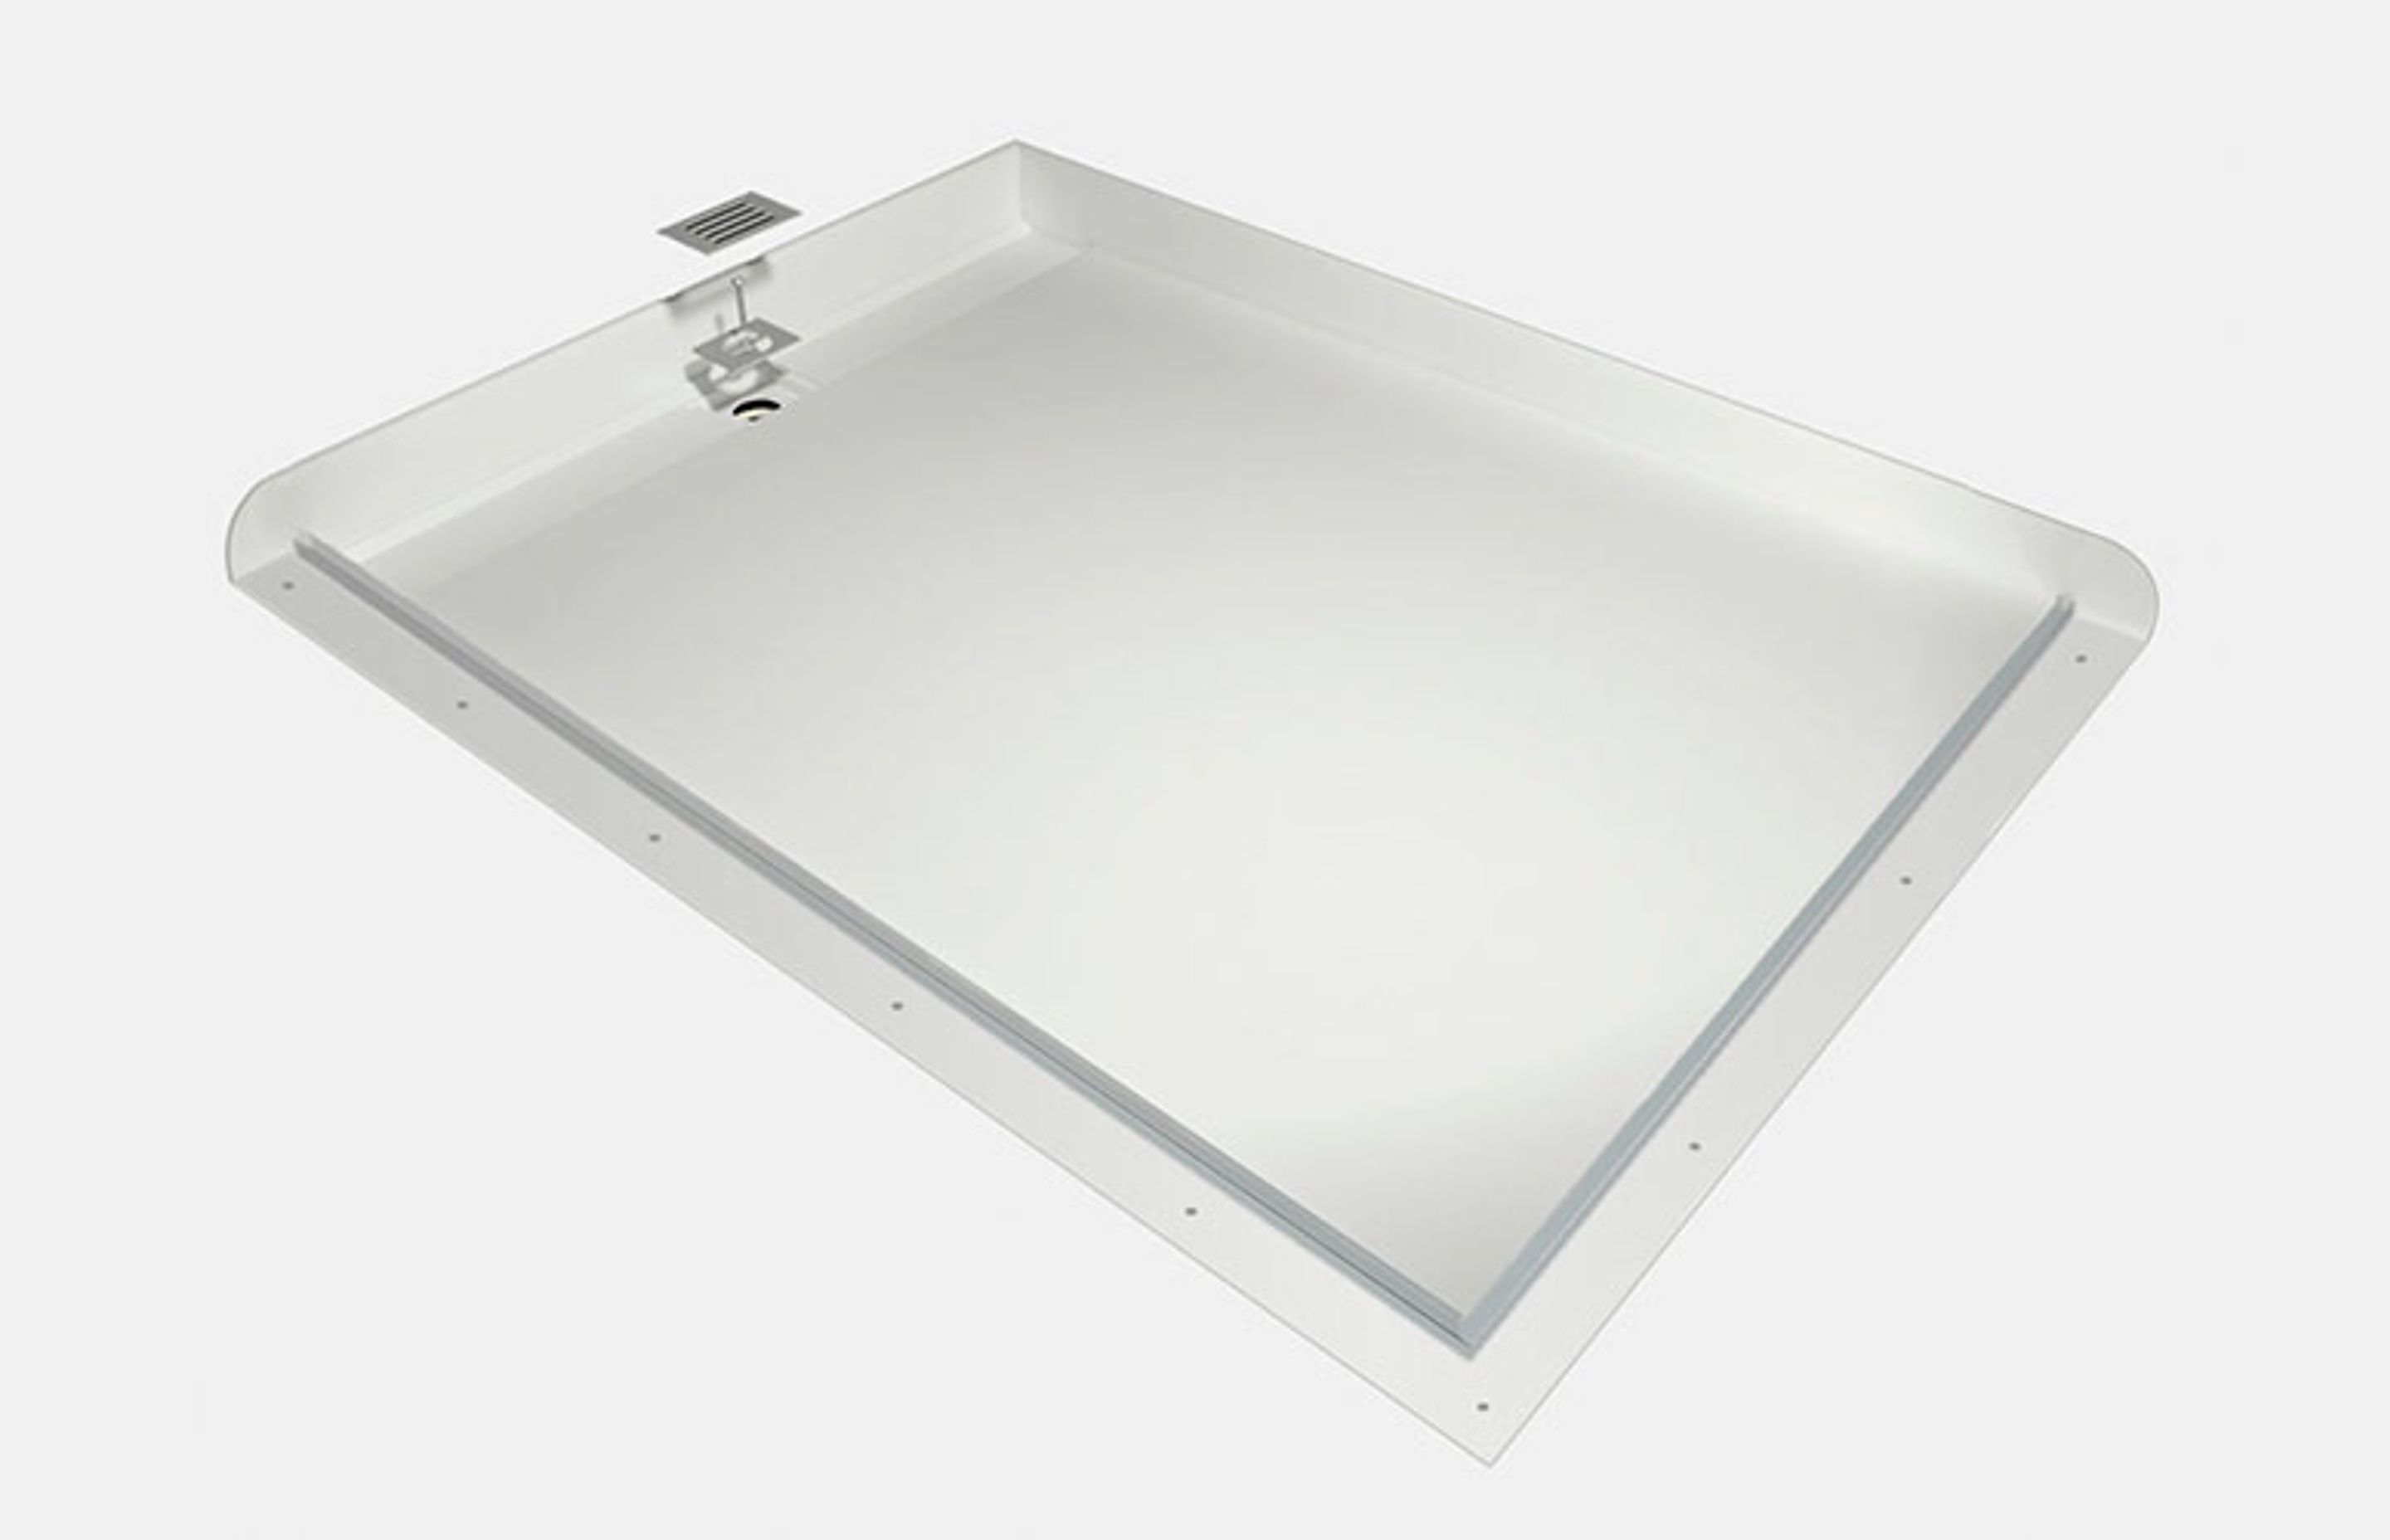 The Atlantis shower tray - featuring a solid and already waterproof construction, integrated waterproofing flanges, factory-fitted glazing channels and discreet channel drain.